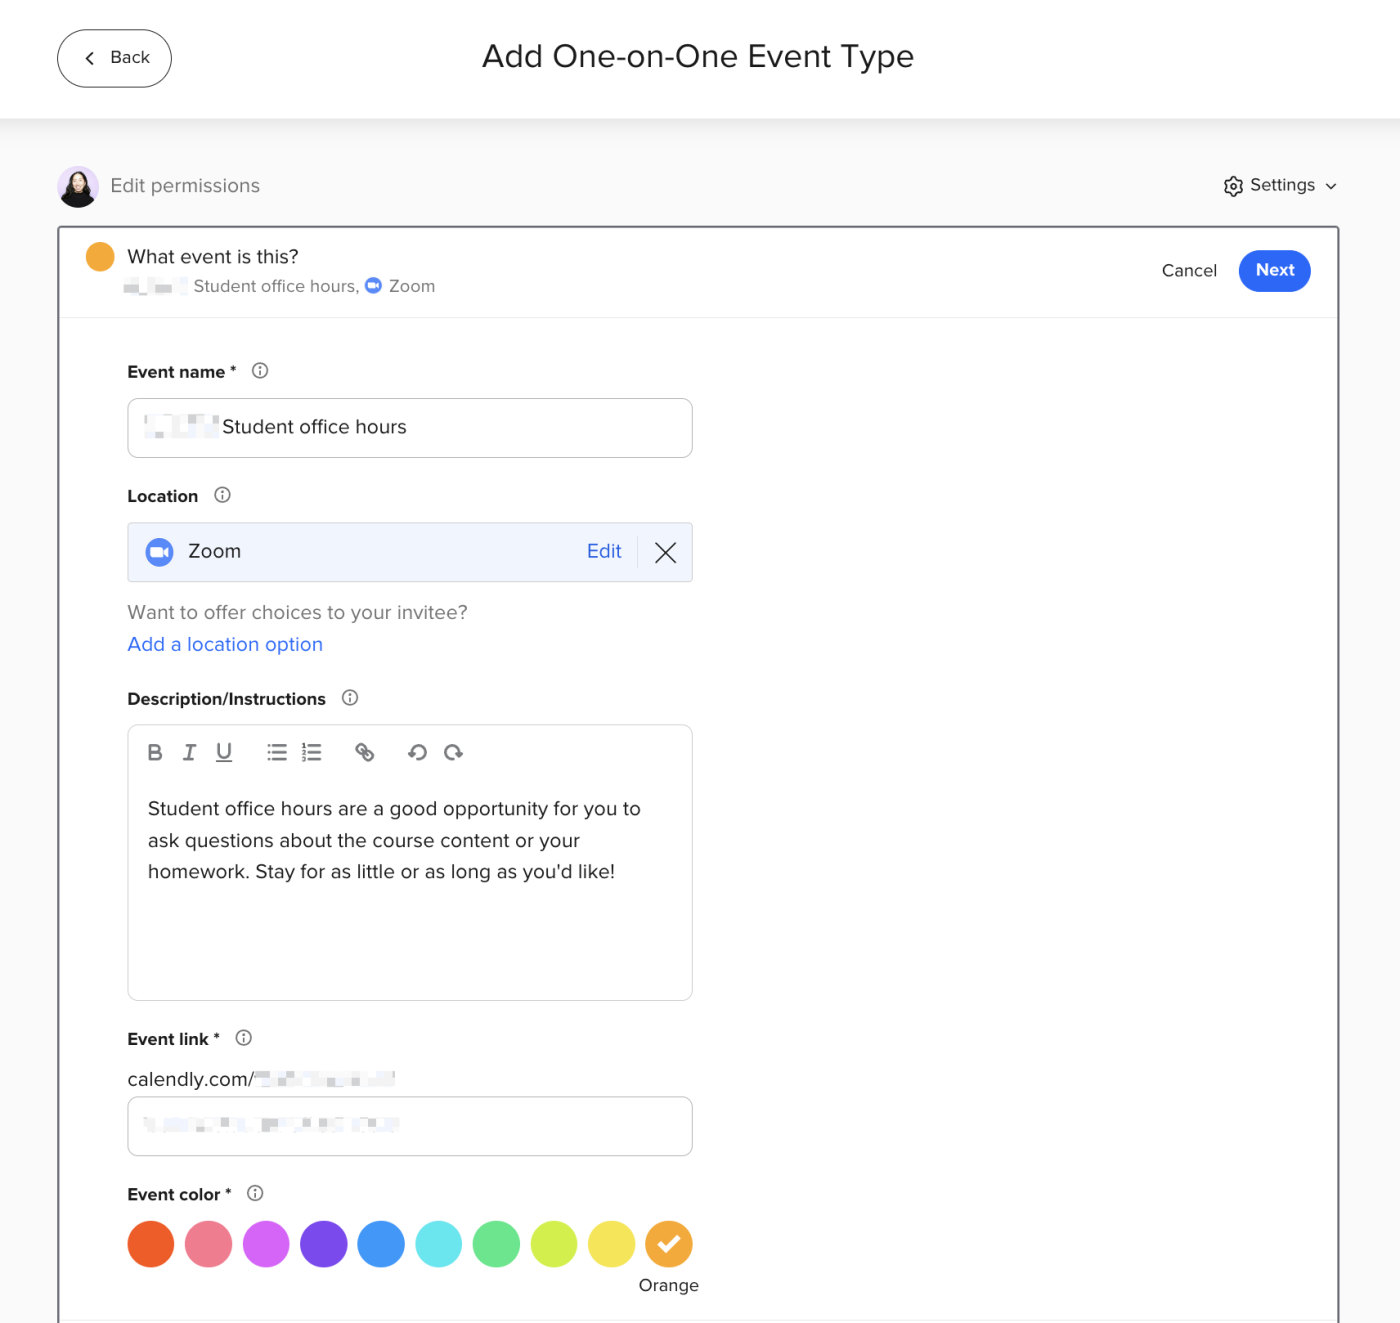 How to edit the meeting details for a one-on-one event type in Calendly.